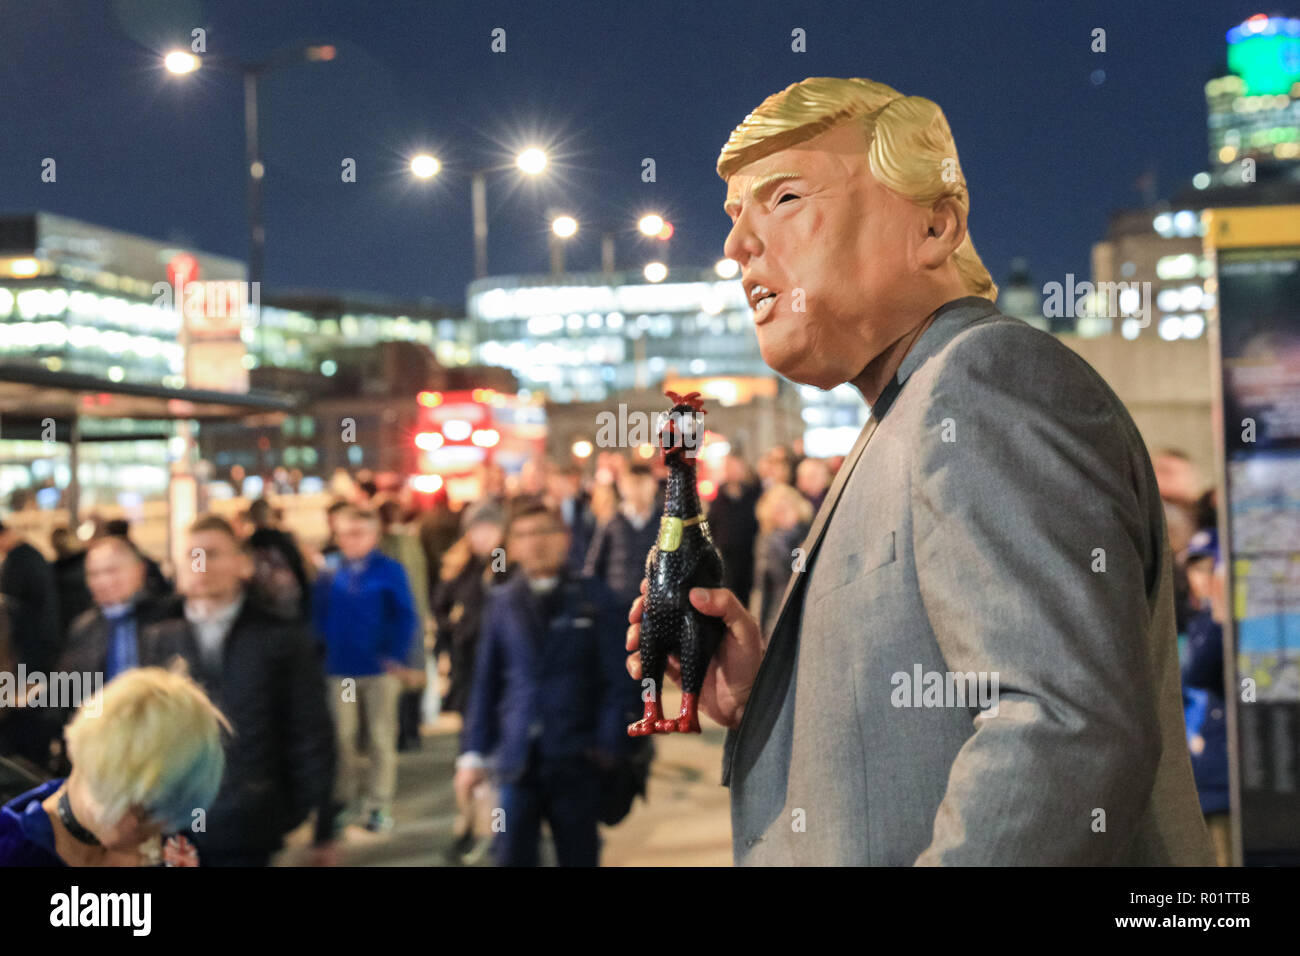 London Bridge Station, London, UK, 31st Oct 2018.  Joan , a protester with Donald Trump mask and 'chlorinated chicken' puppet, talks to passers by to raise awareness. London Bridge Station to raise awareness amongst the busy evening commuter crowd. Activists from anti-Brexit group 'No 10 Vigil' protest outside London Bridge Station with placards, banners and music. and hand out leaflets. Credit: Imageplotter News and Sports/Alamy Live News Stock Photo